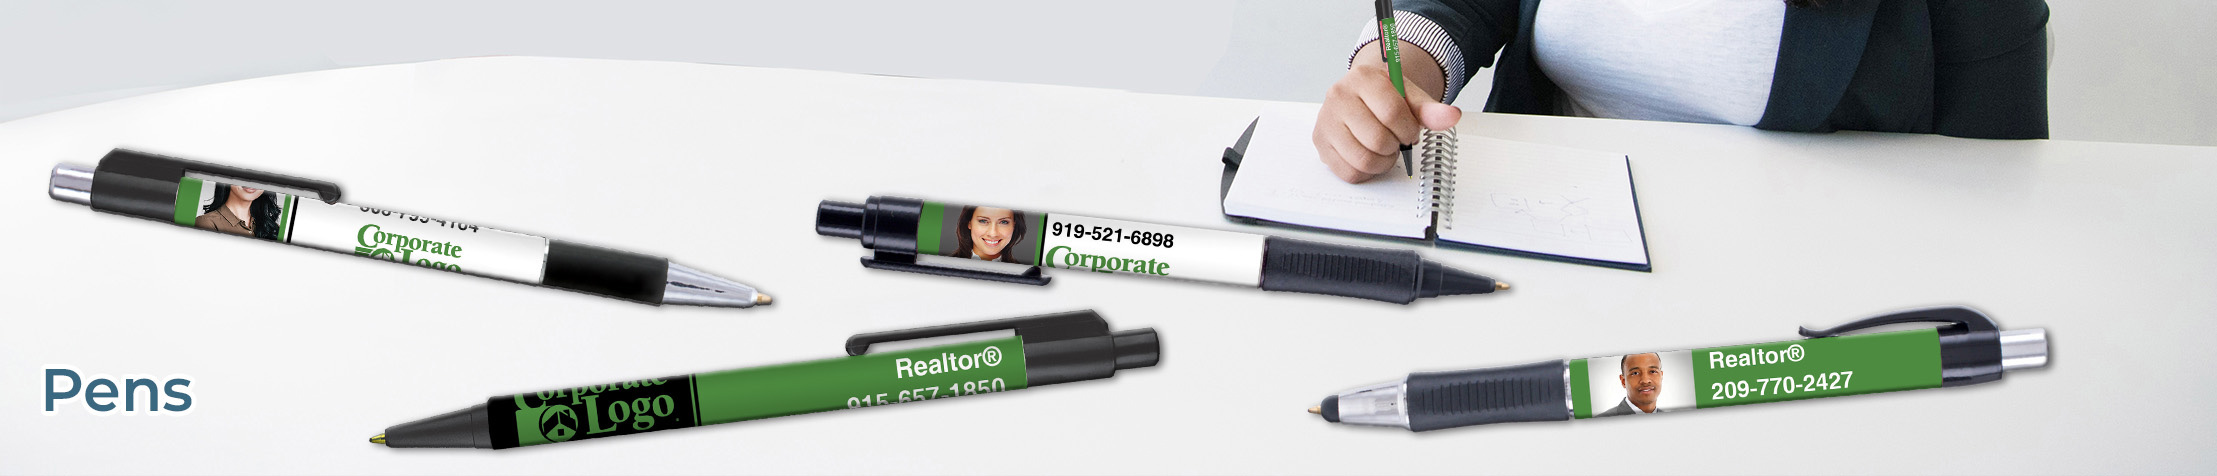 Better Homes and Gardens Real Estate Pens - BHGRE  personalized realtor promotional products | BestPrintBuy.com